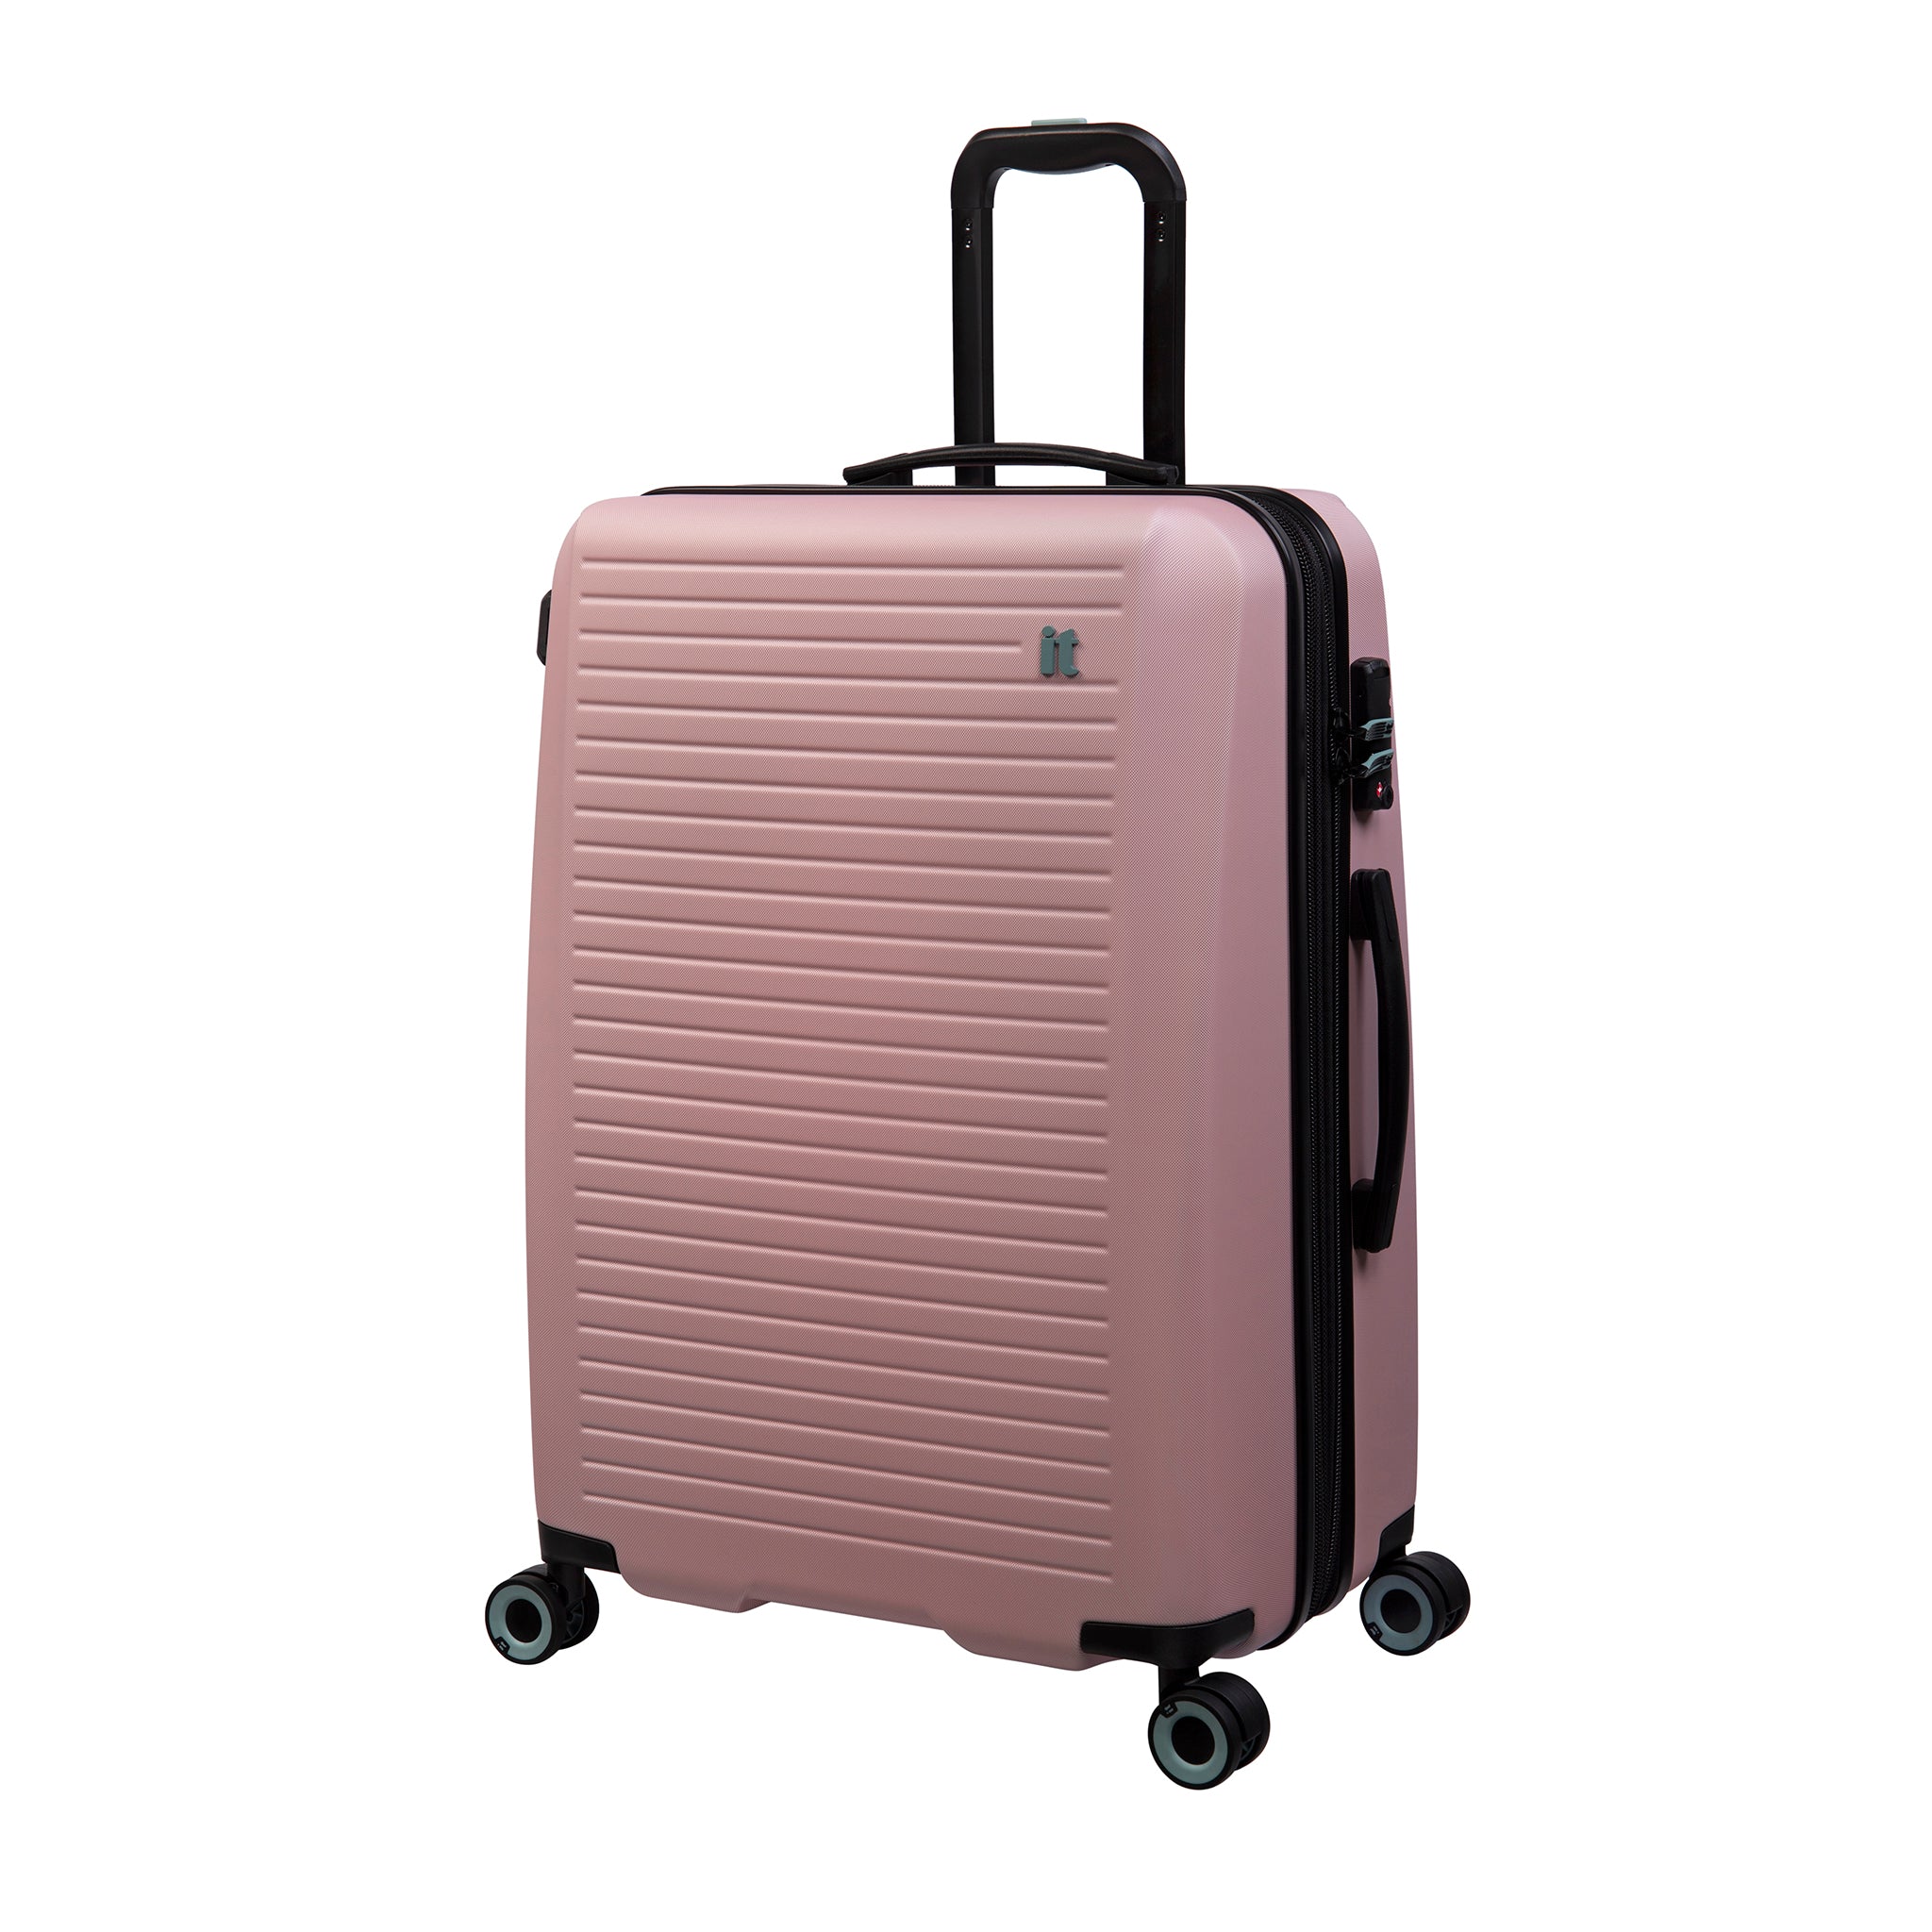 it Luggage | Interlined - 3pc Set in Pale Mauve